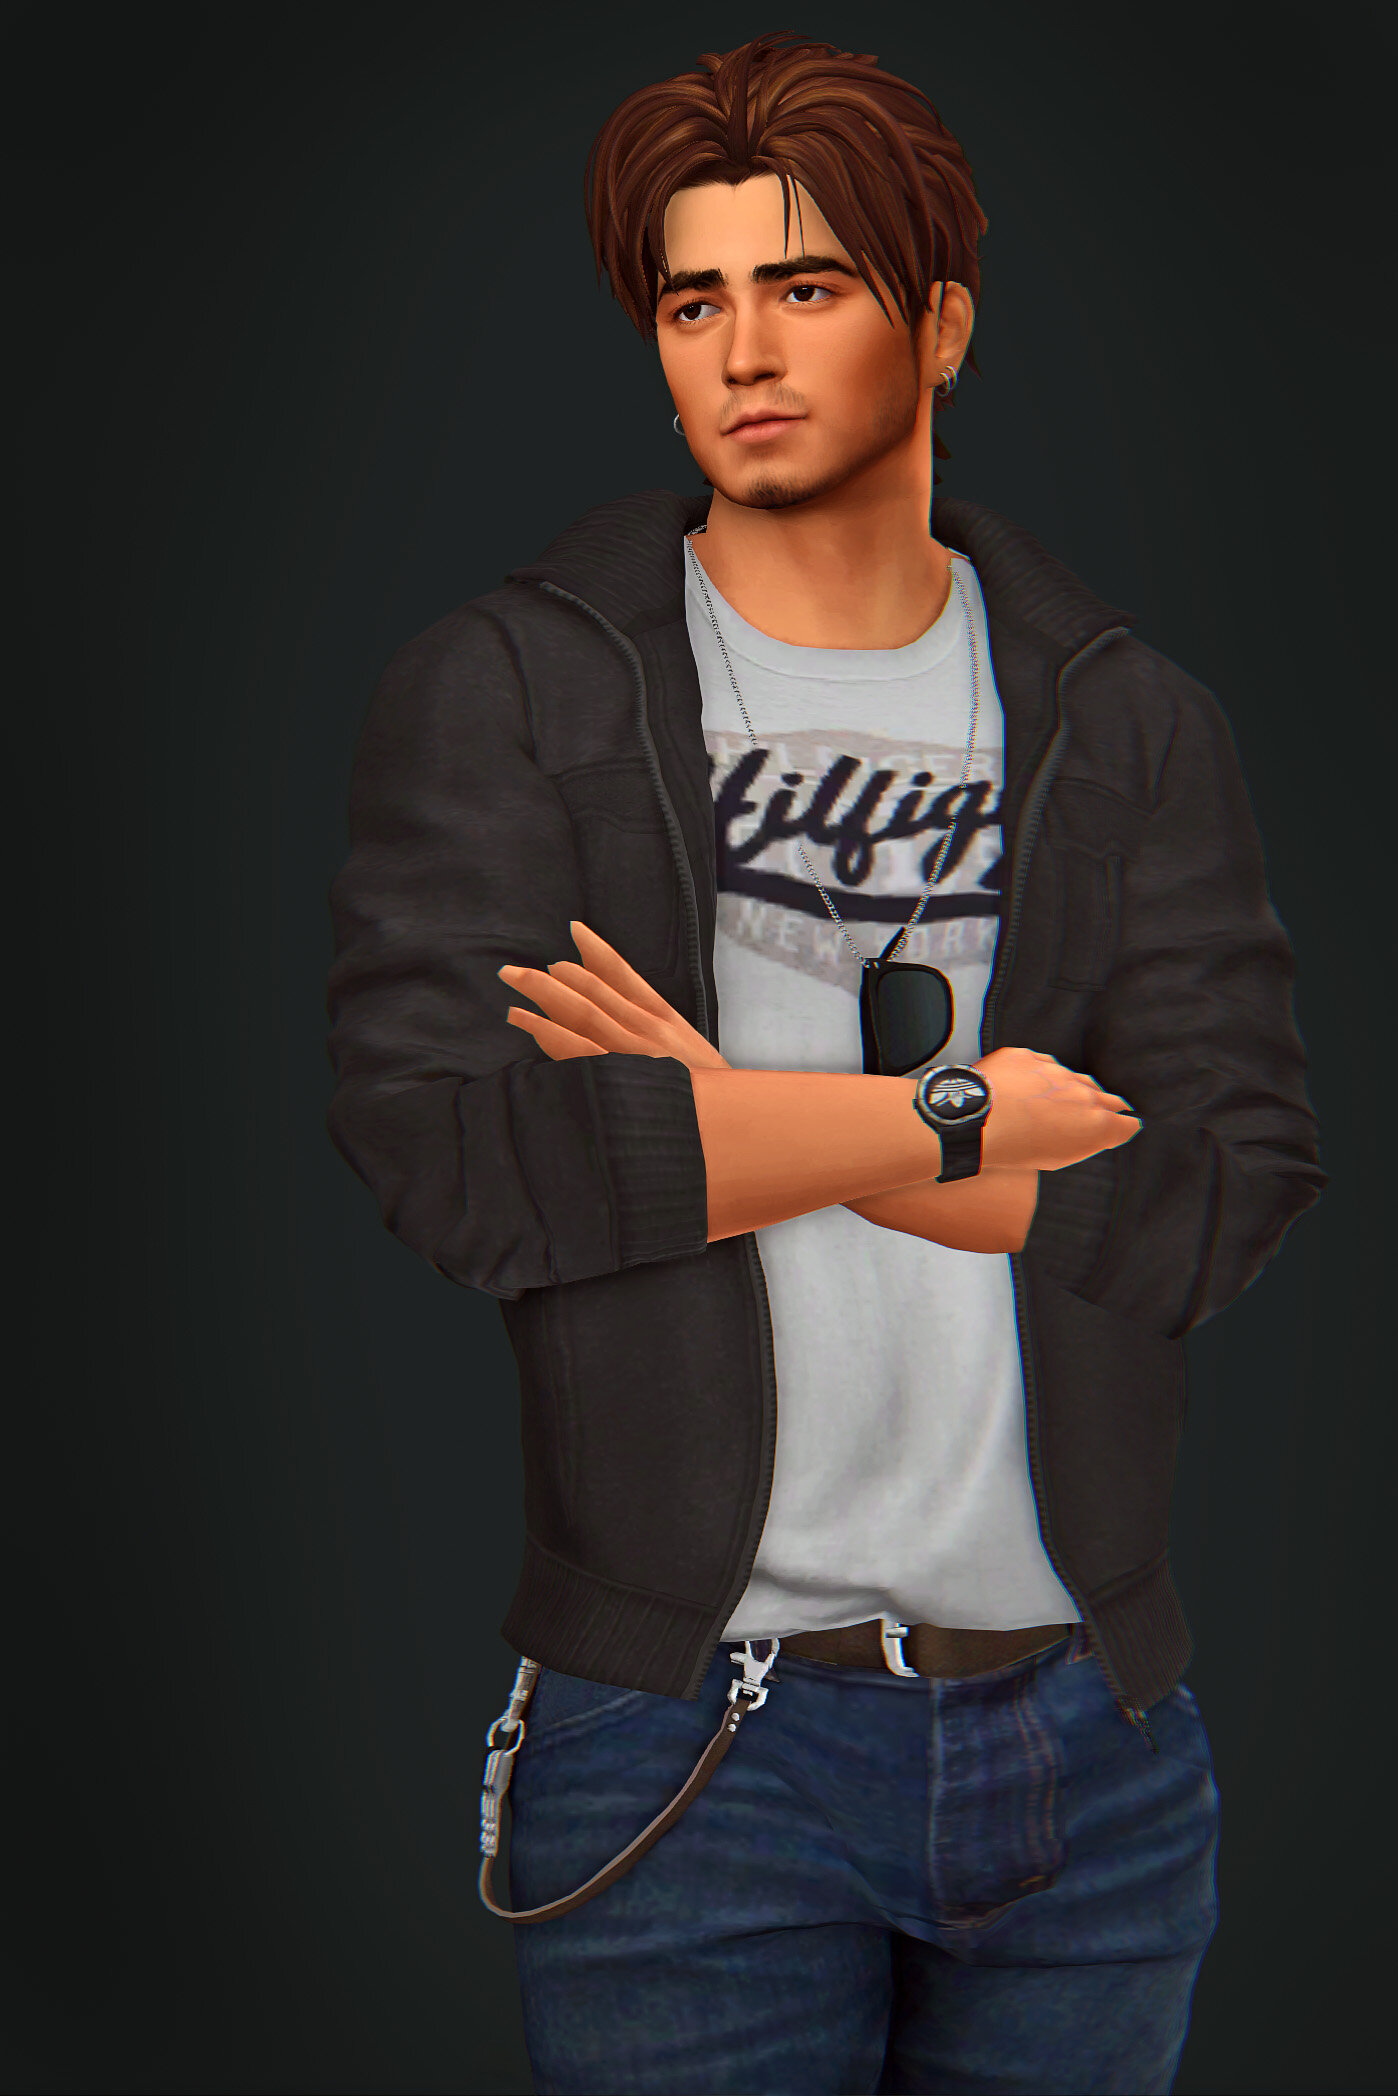 Share Your Male Sims! - Page 192 - The Sims 4 General Discussion ...